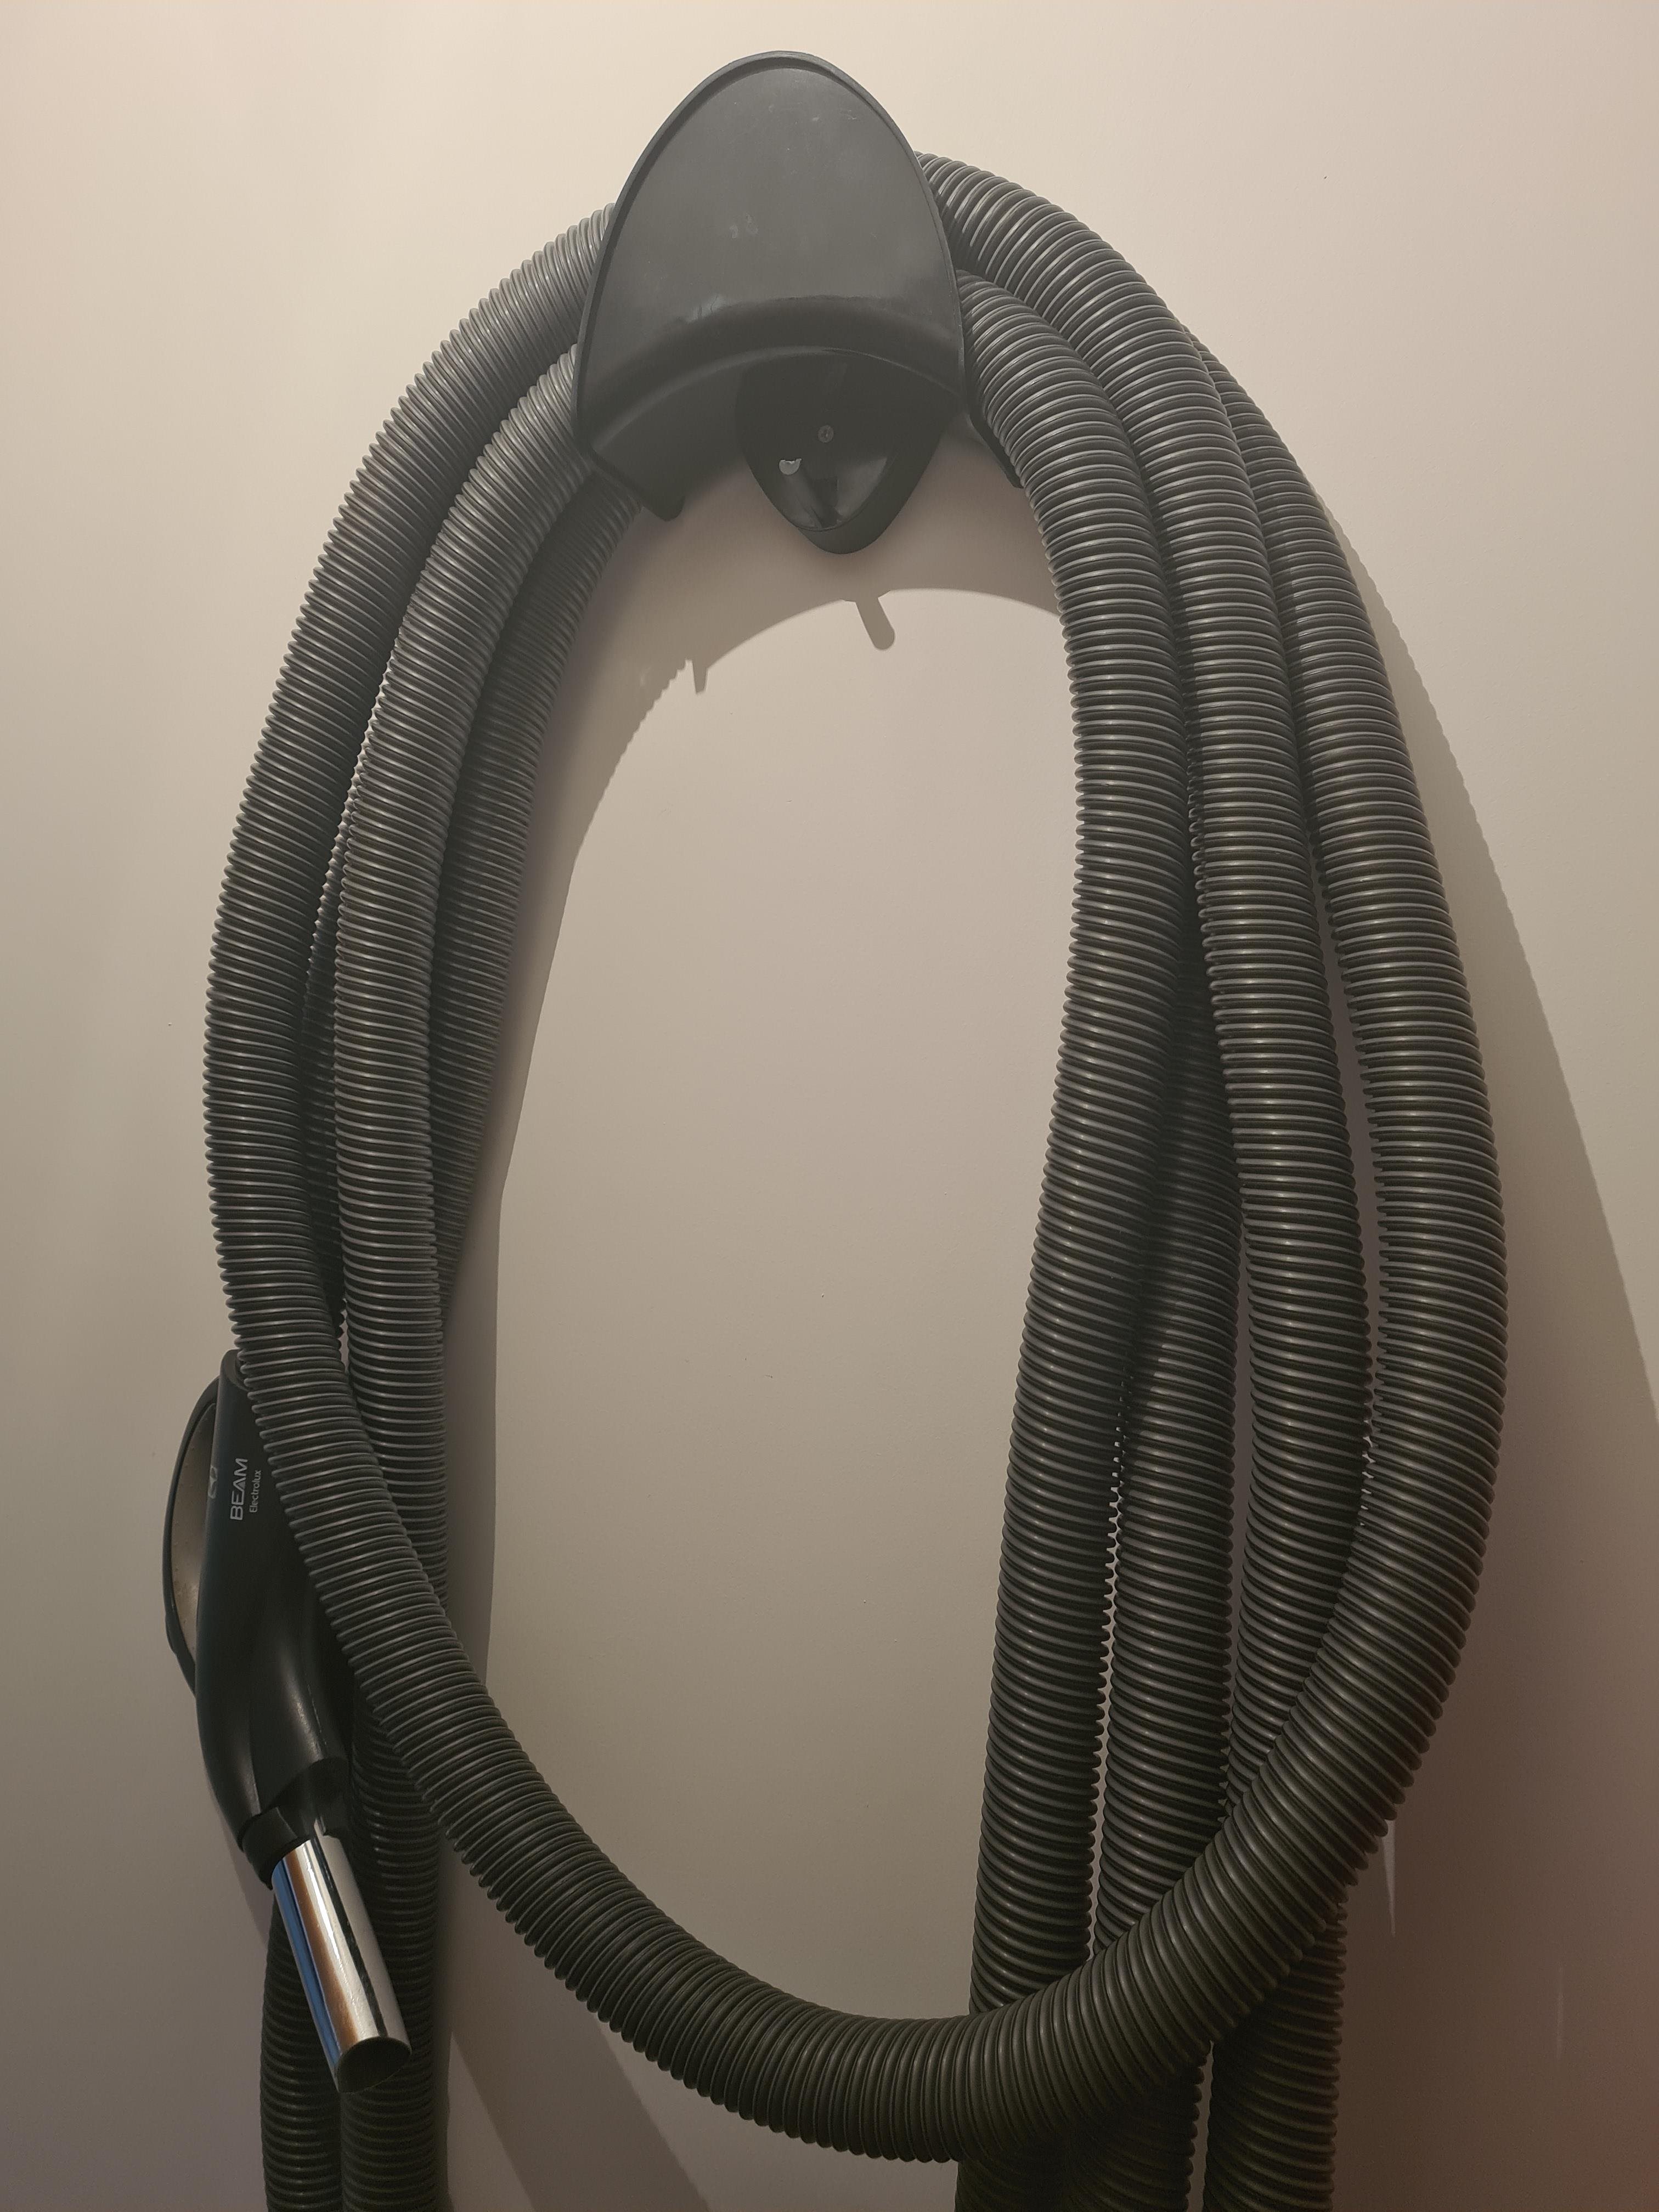 Beam Central Vacuum hose on hanger on wall